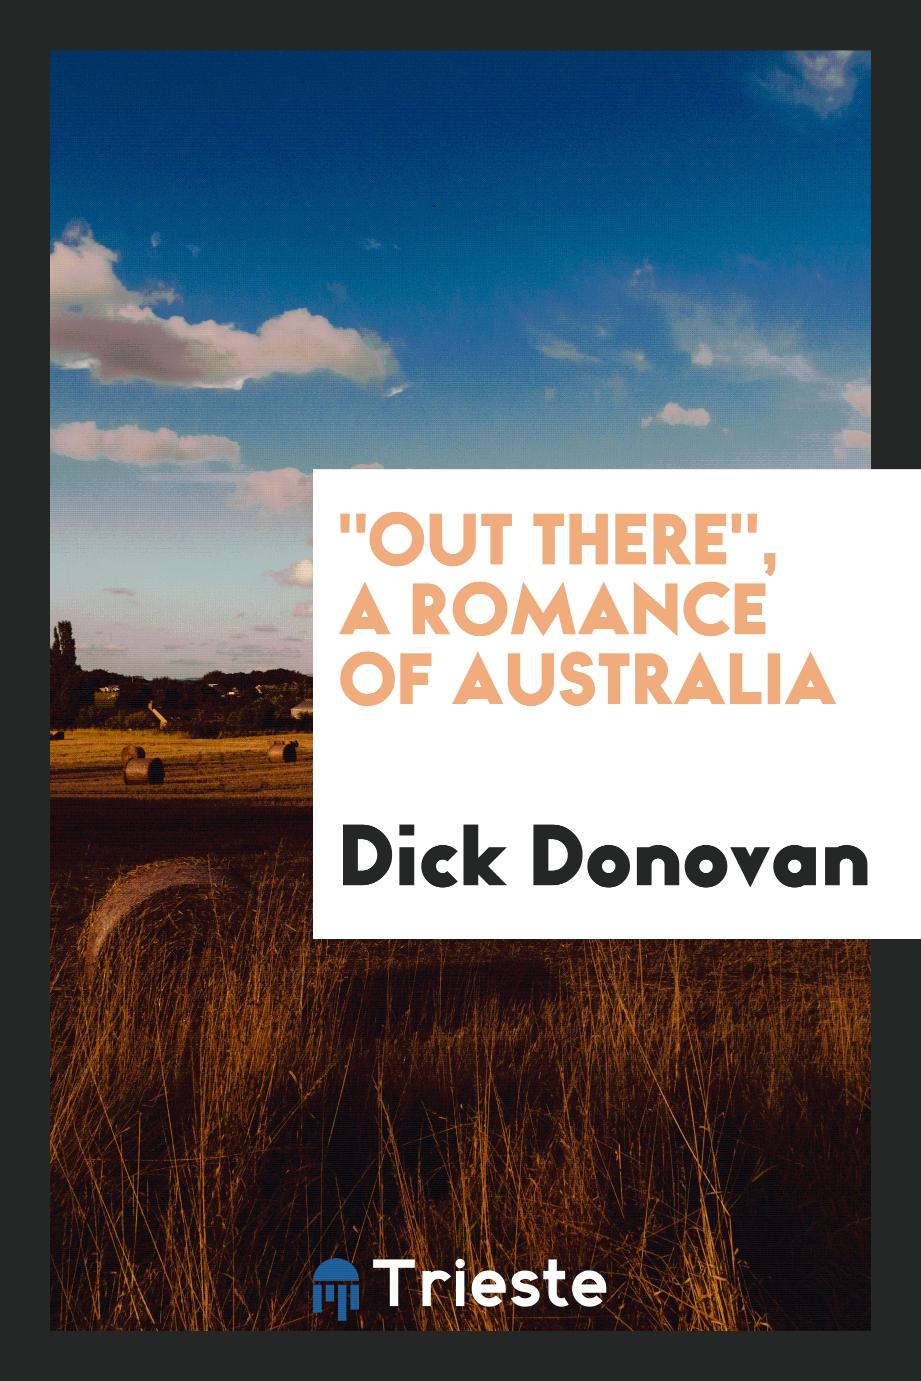 "Out there", a romance of Australia